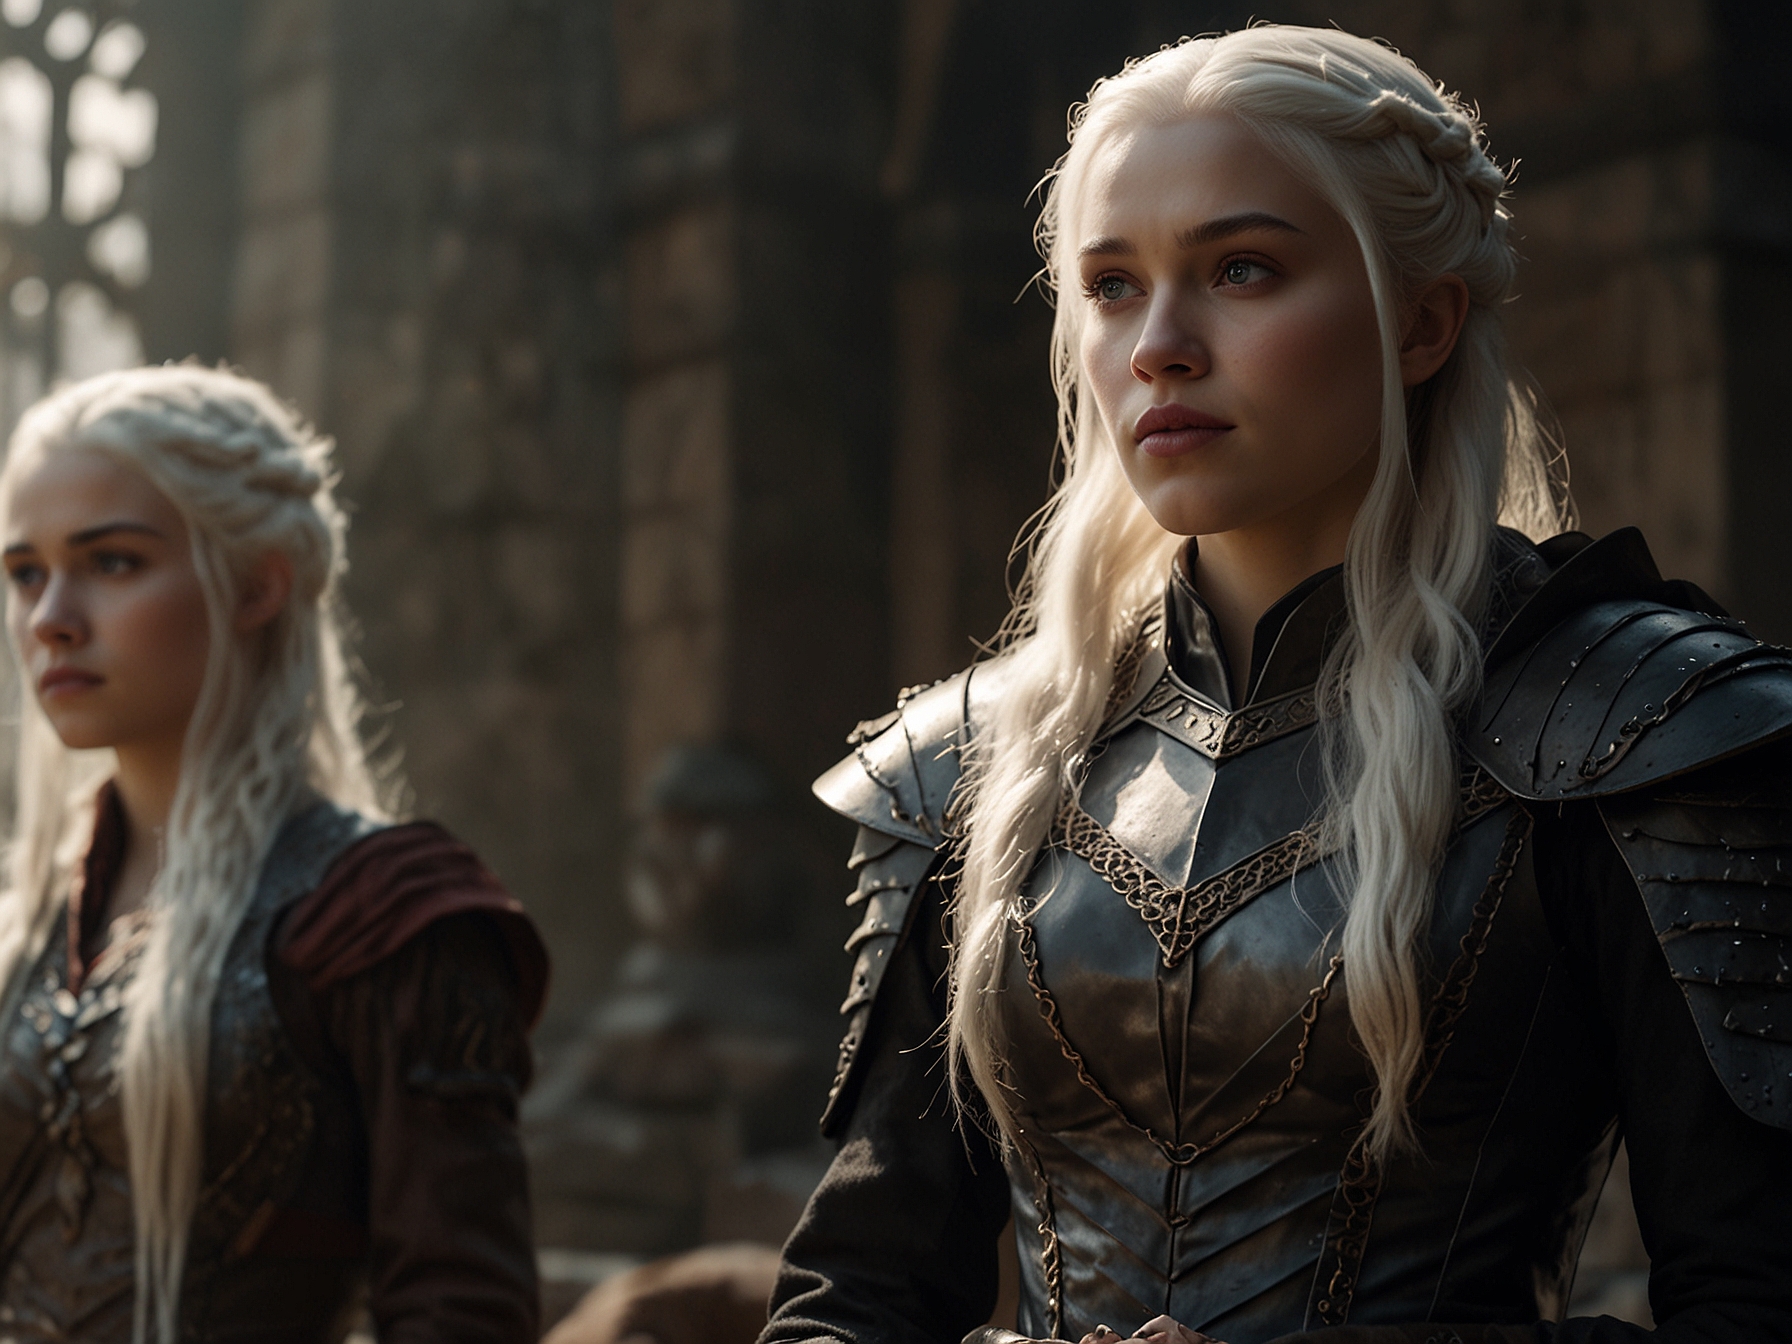 Rhaenyra Targaryen, Daemon Targaryen, and Alicent Hightower are pivotal in the episode, each depicted in moments of intense character development that drive the episode's narrative tension and drama.